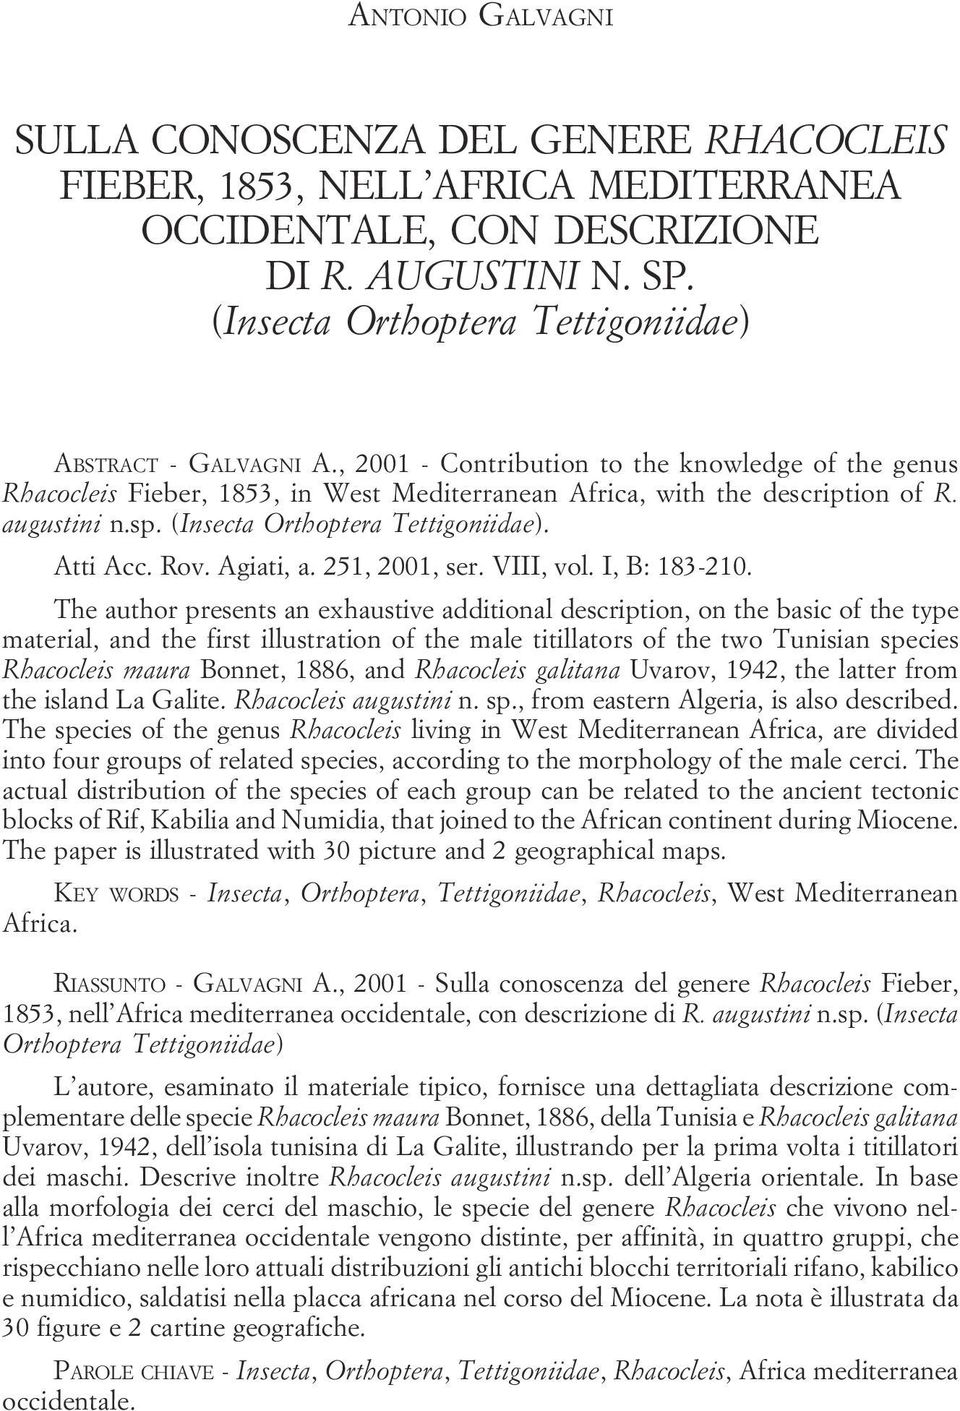 of R augustini n sp (Insecta Orthoptera Tettigoniidae) Atti Acc Rov Agiati, a 251, 2001, ser VIII, vol I, B: 183-210 The author presents an exhaustive additional description, on the basic of the type